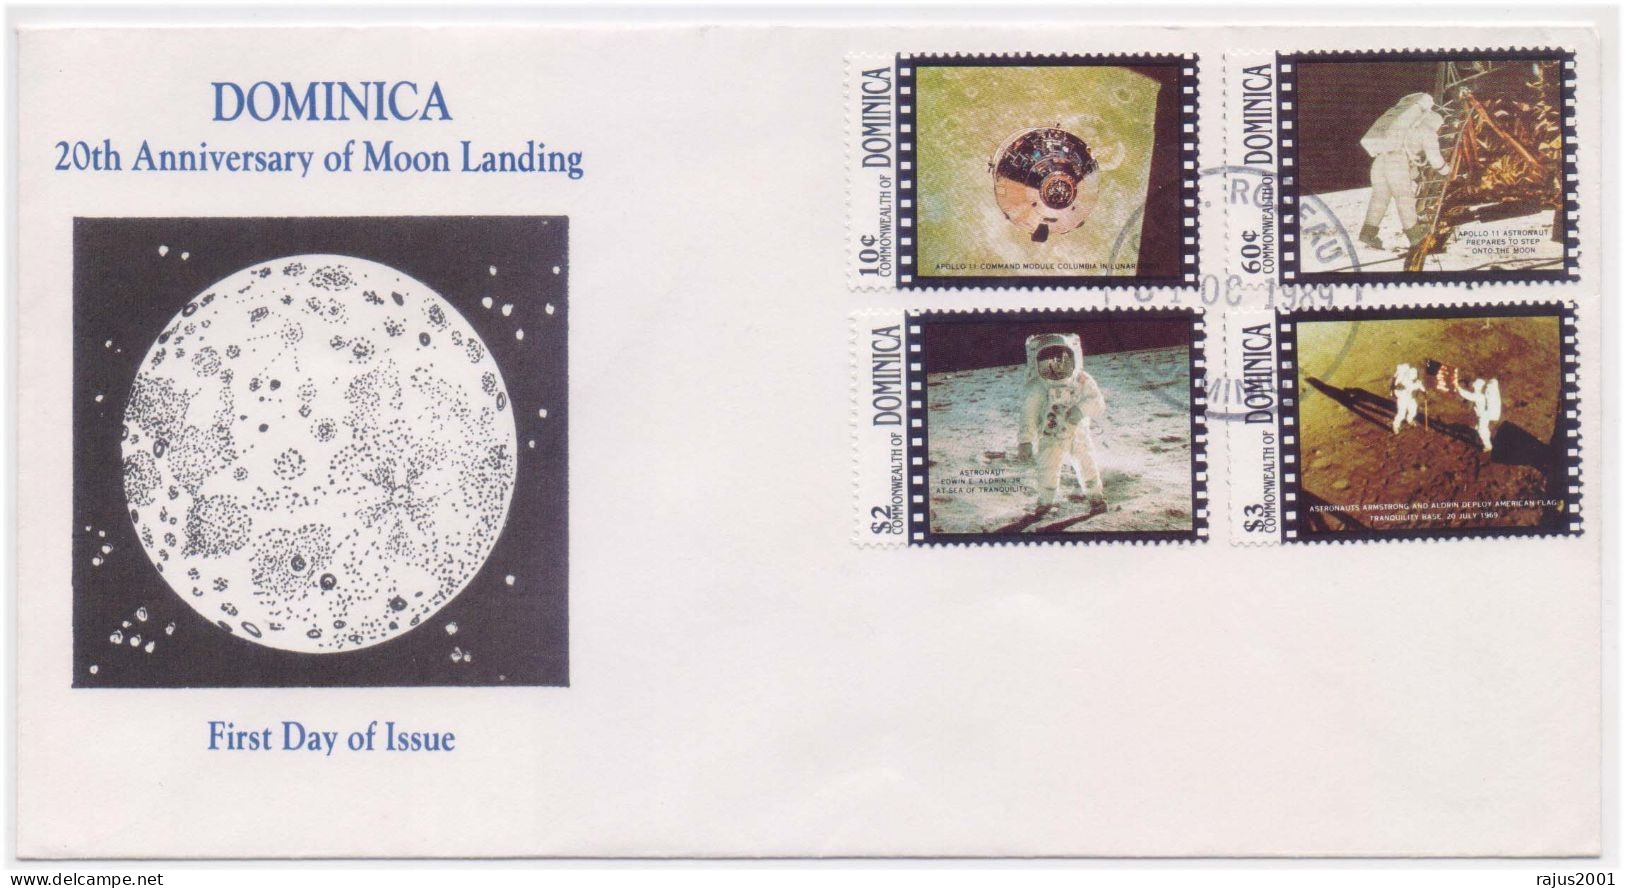 NASA  Apollo II Mission, Module Columbia, Lunar Module Eagle First Landing On The Moon, Space, Science, Astronomy FDC - Astronomy